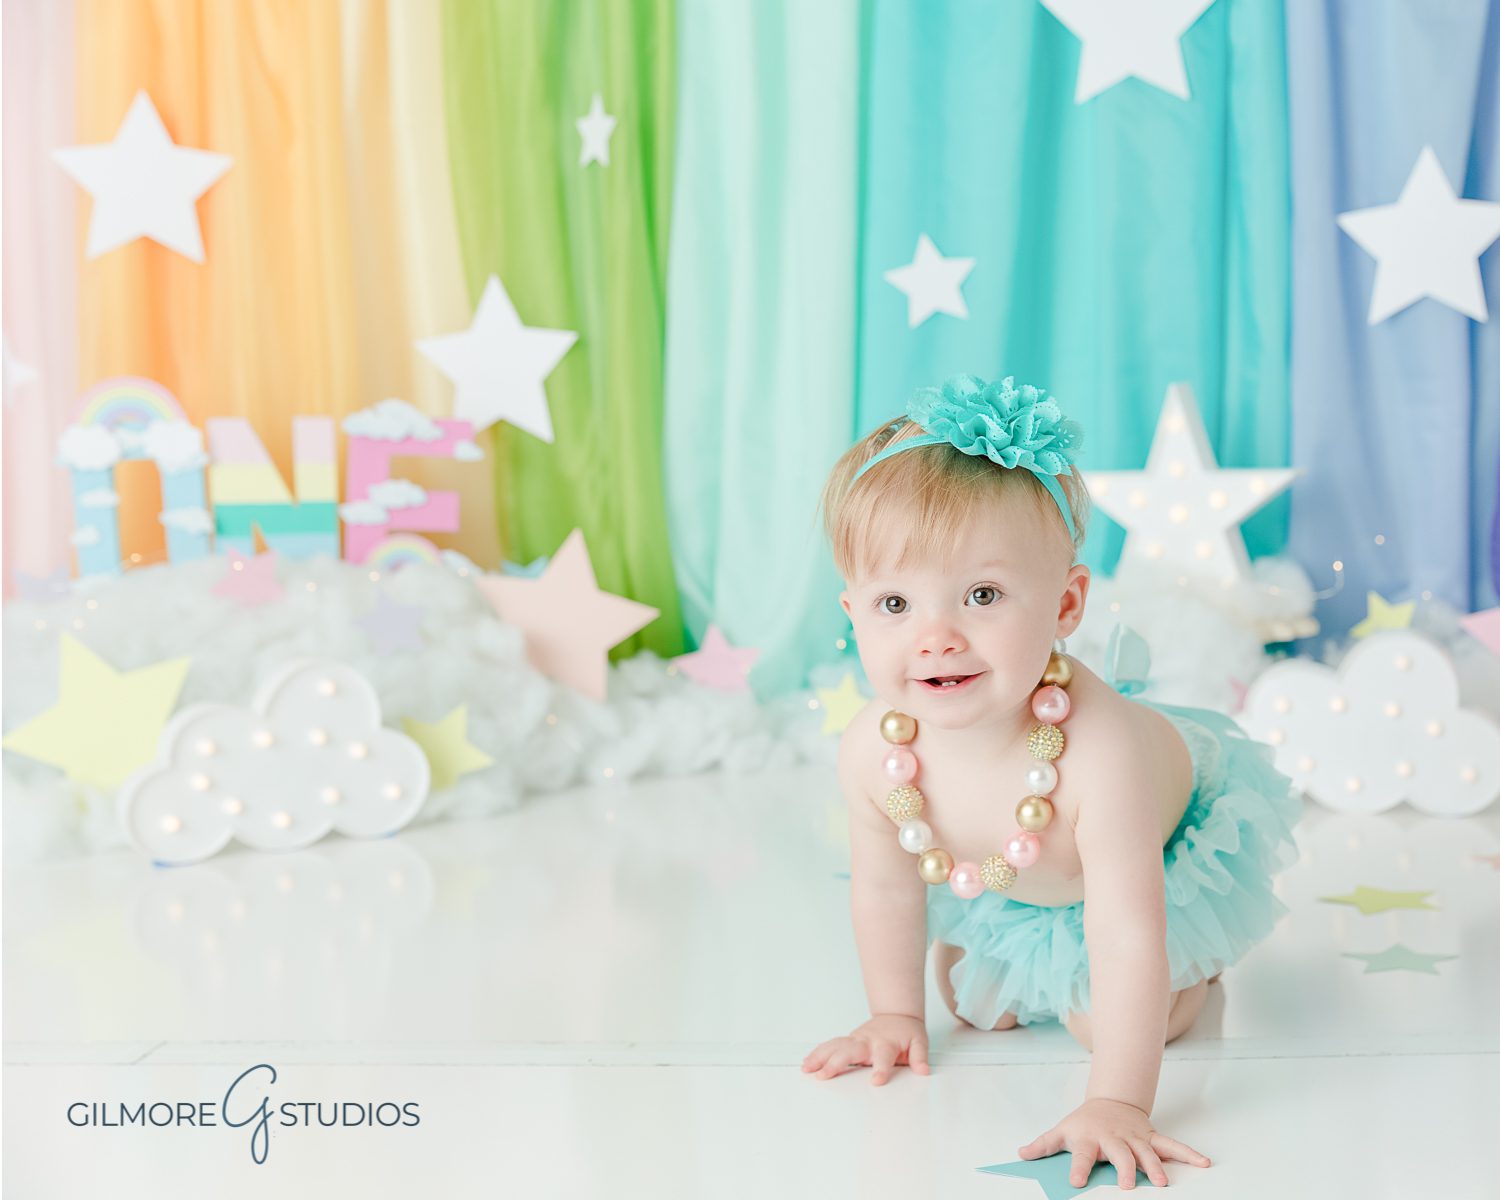 gilbert cake smash photographer, rainbow set, clouds, star, sky, one year old, girl, headband, 1st birthday, east valley childrens photography studio, gilmore studios, 1 year old portrait session, Queen Creek, Chandler, Scottsdale baby photo